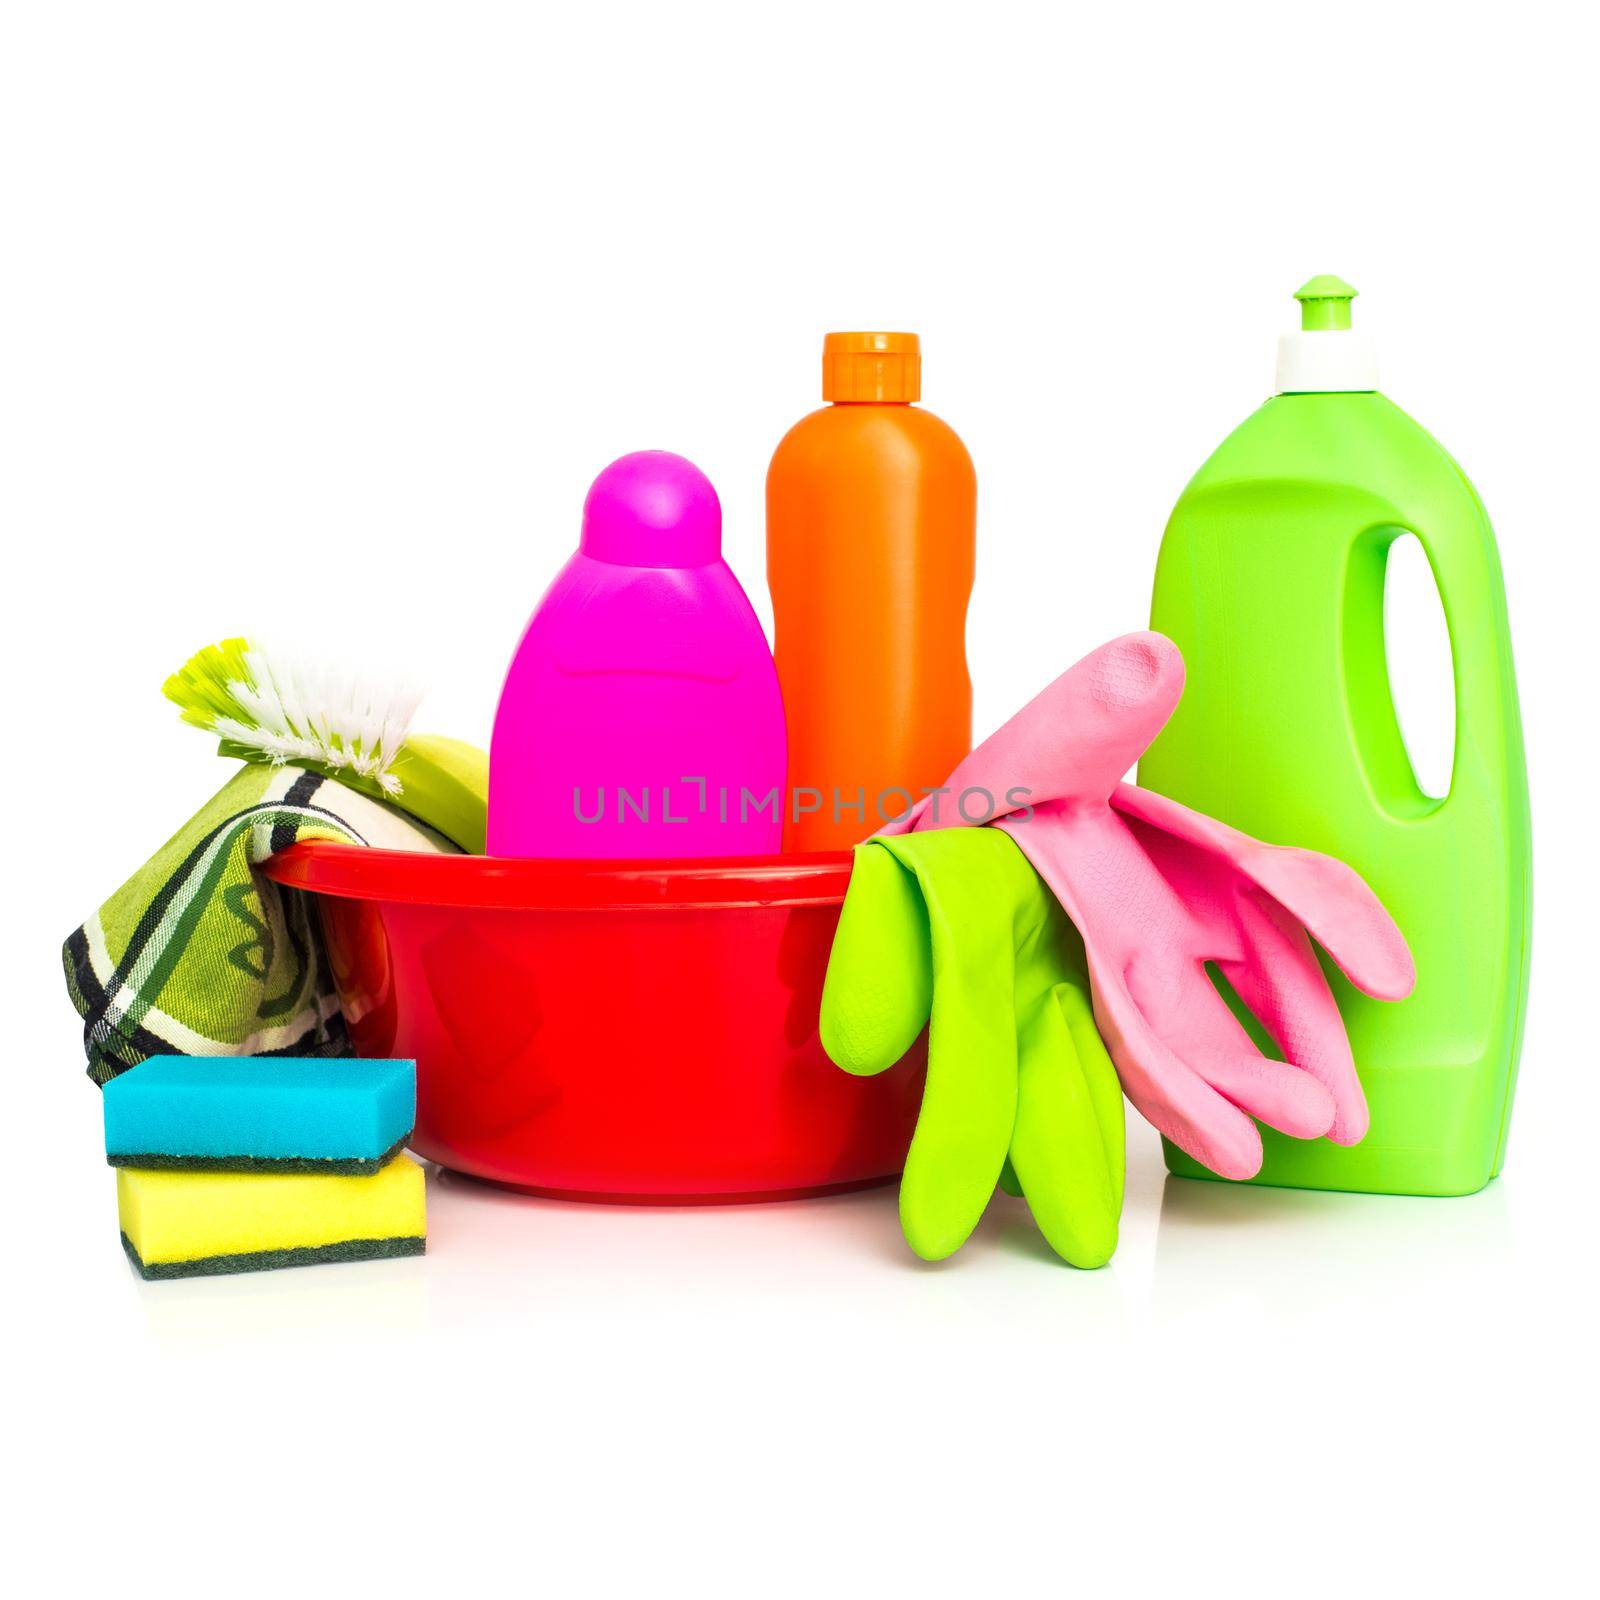 cleaning supplies and gloves isolated on white background